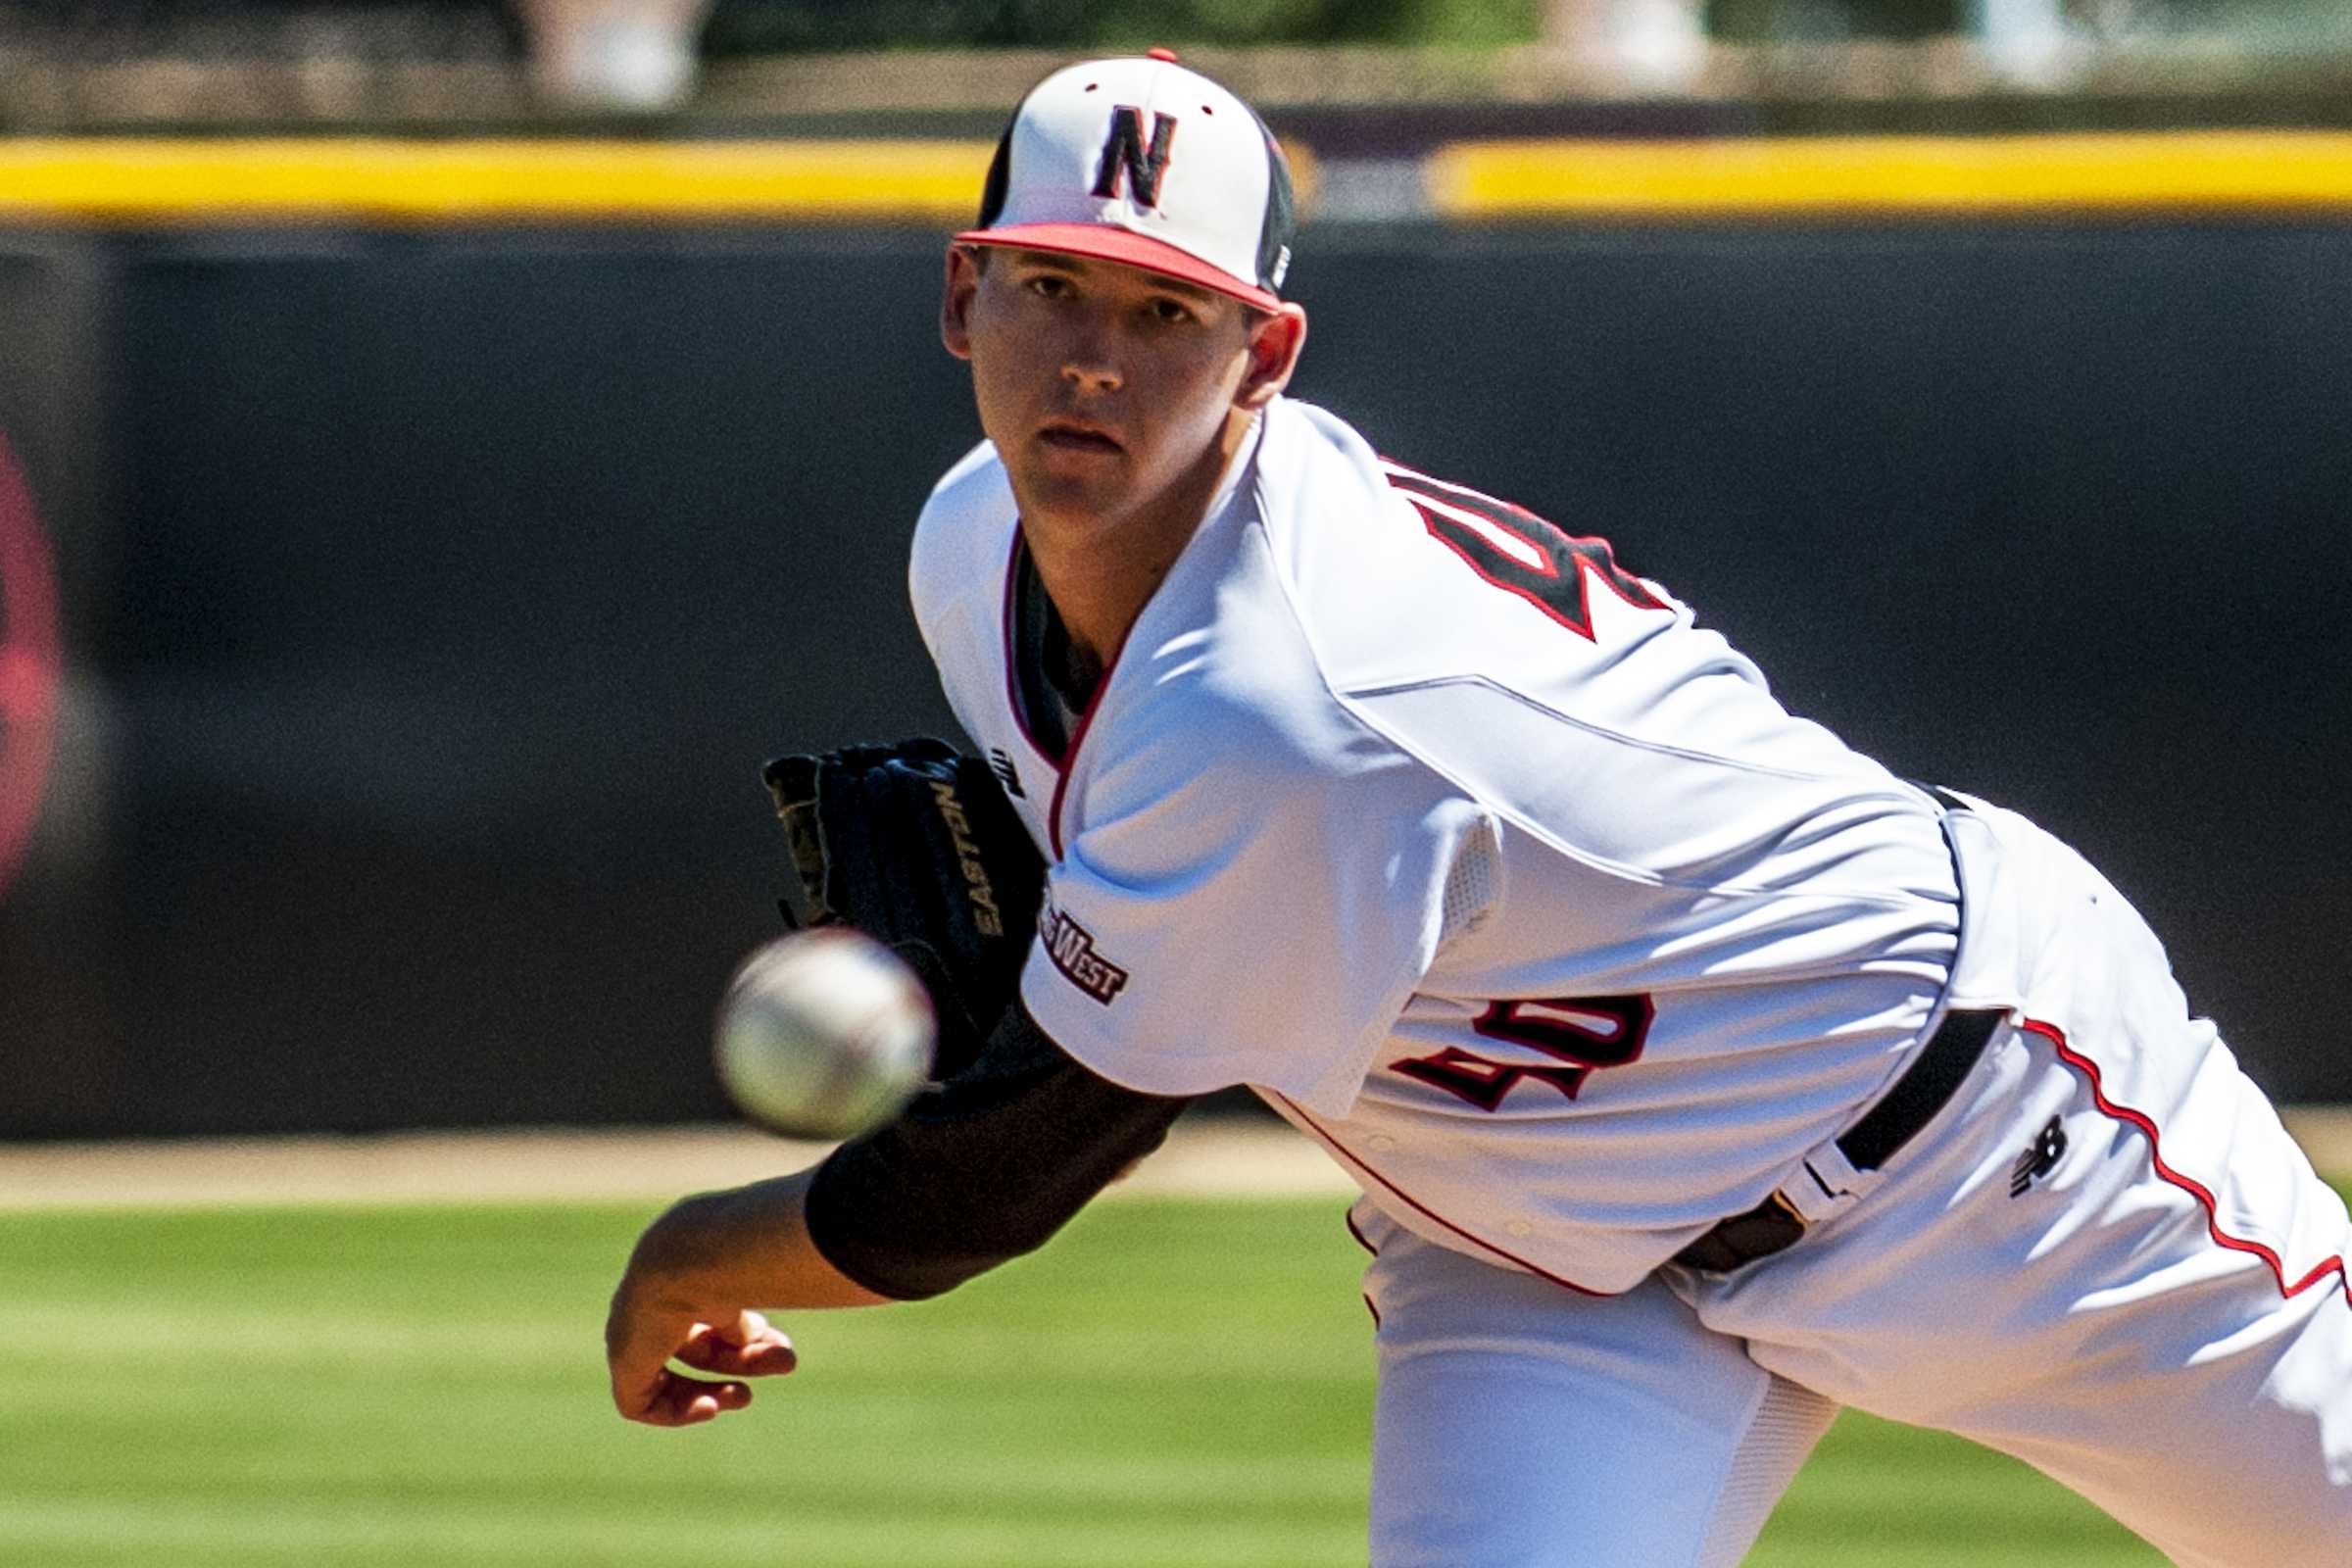 Senior+starting+pitcher+Jerry+Keel+controlled+the+game+as+he+garnered+his+fourth+win+of+the+season+against+Big+West+powerhouse+CSU+Fullerton%2C+Sat%2C+Mar.+28+at+Matador+Field.+%28Photo+Credit%3A+BHEphotos%29